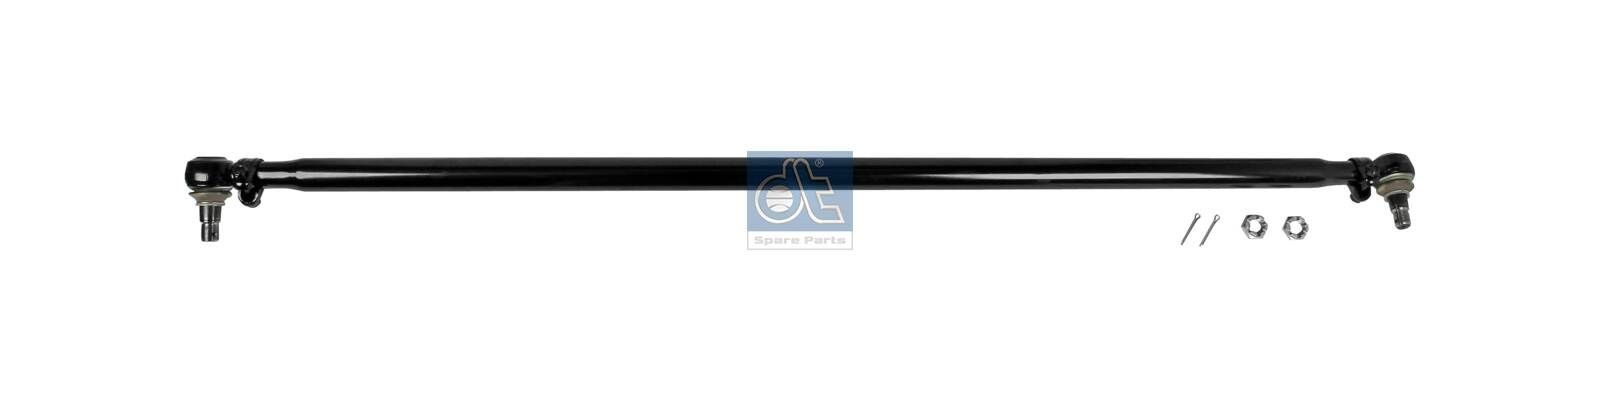 DT Spare Parts 6.53008 Rod Assembly 5010 439 631